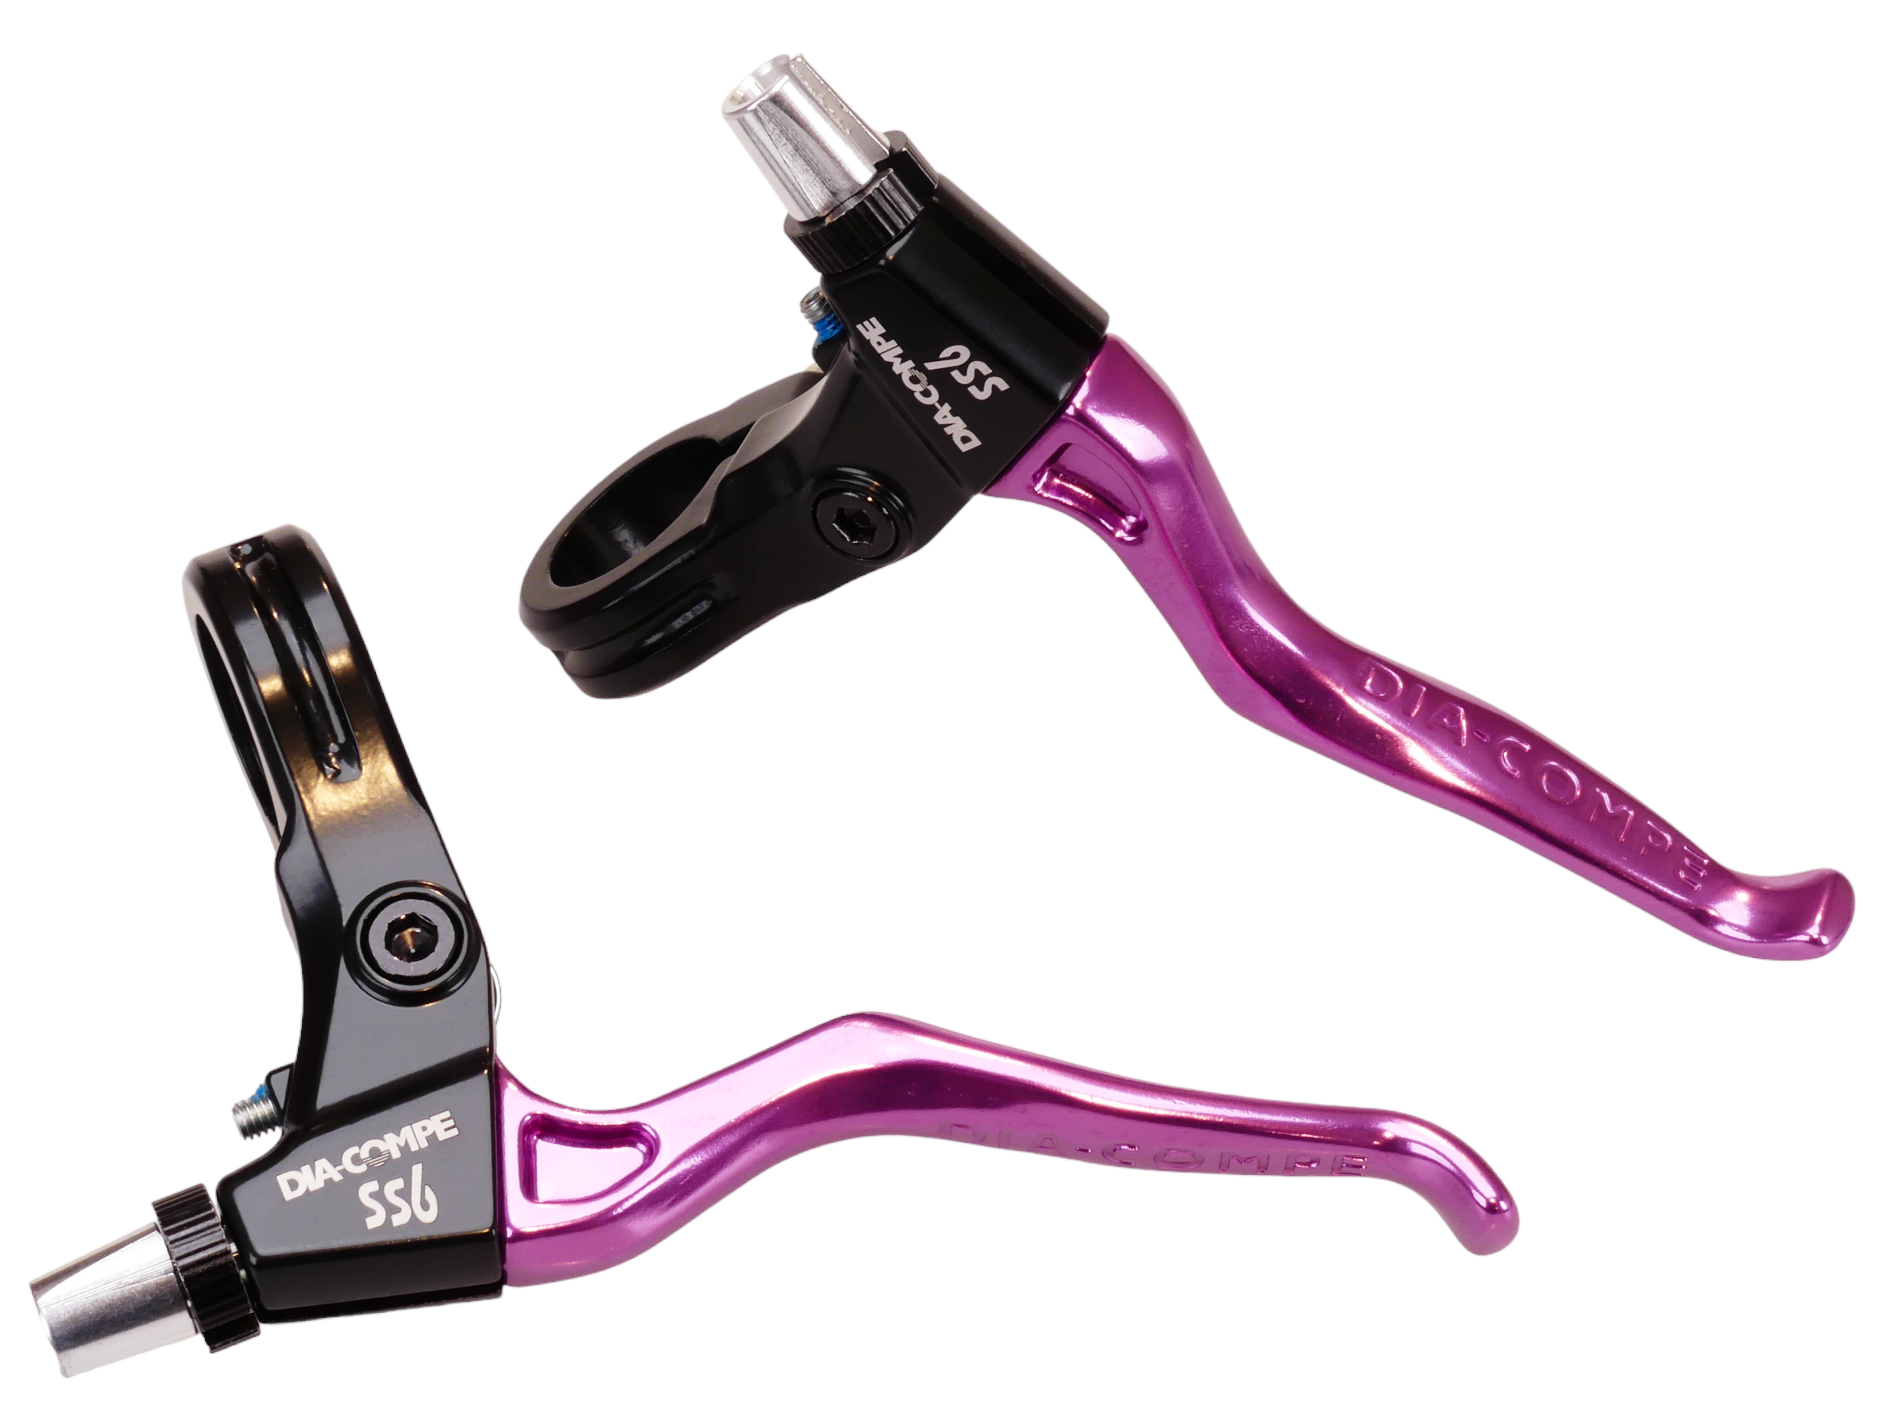 Dia-Compe SS6 Old School MTB Mountain Bicycle Brake Levers Lever Set -  PURPLE